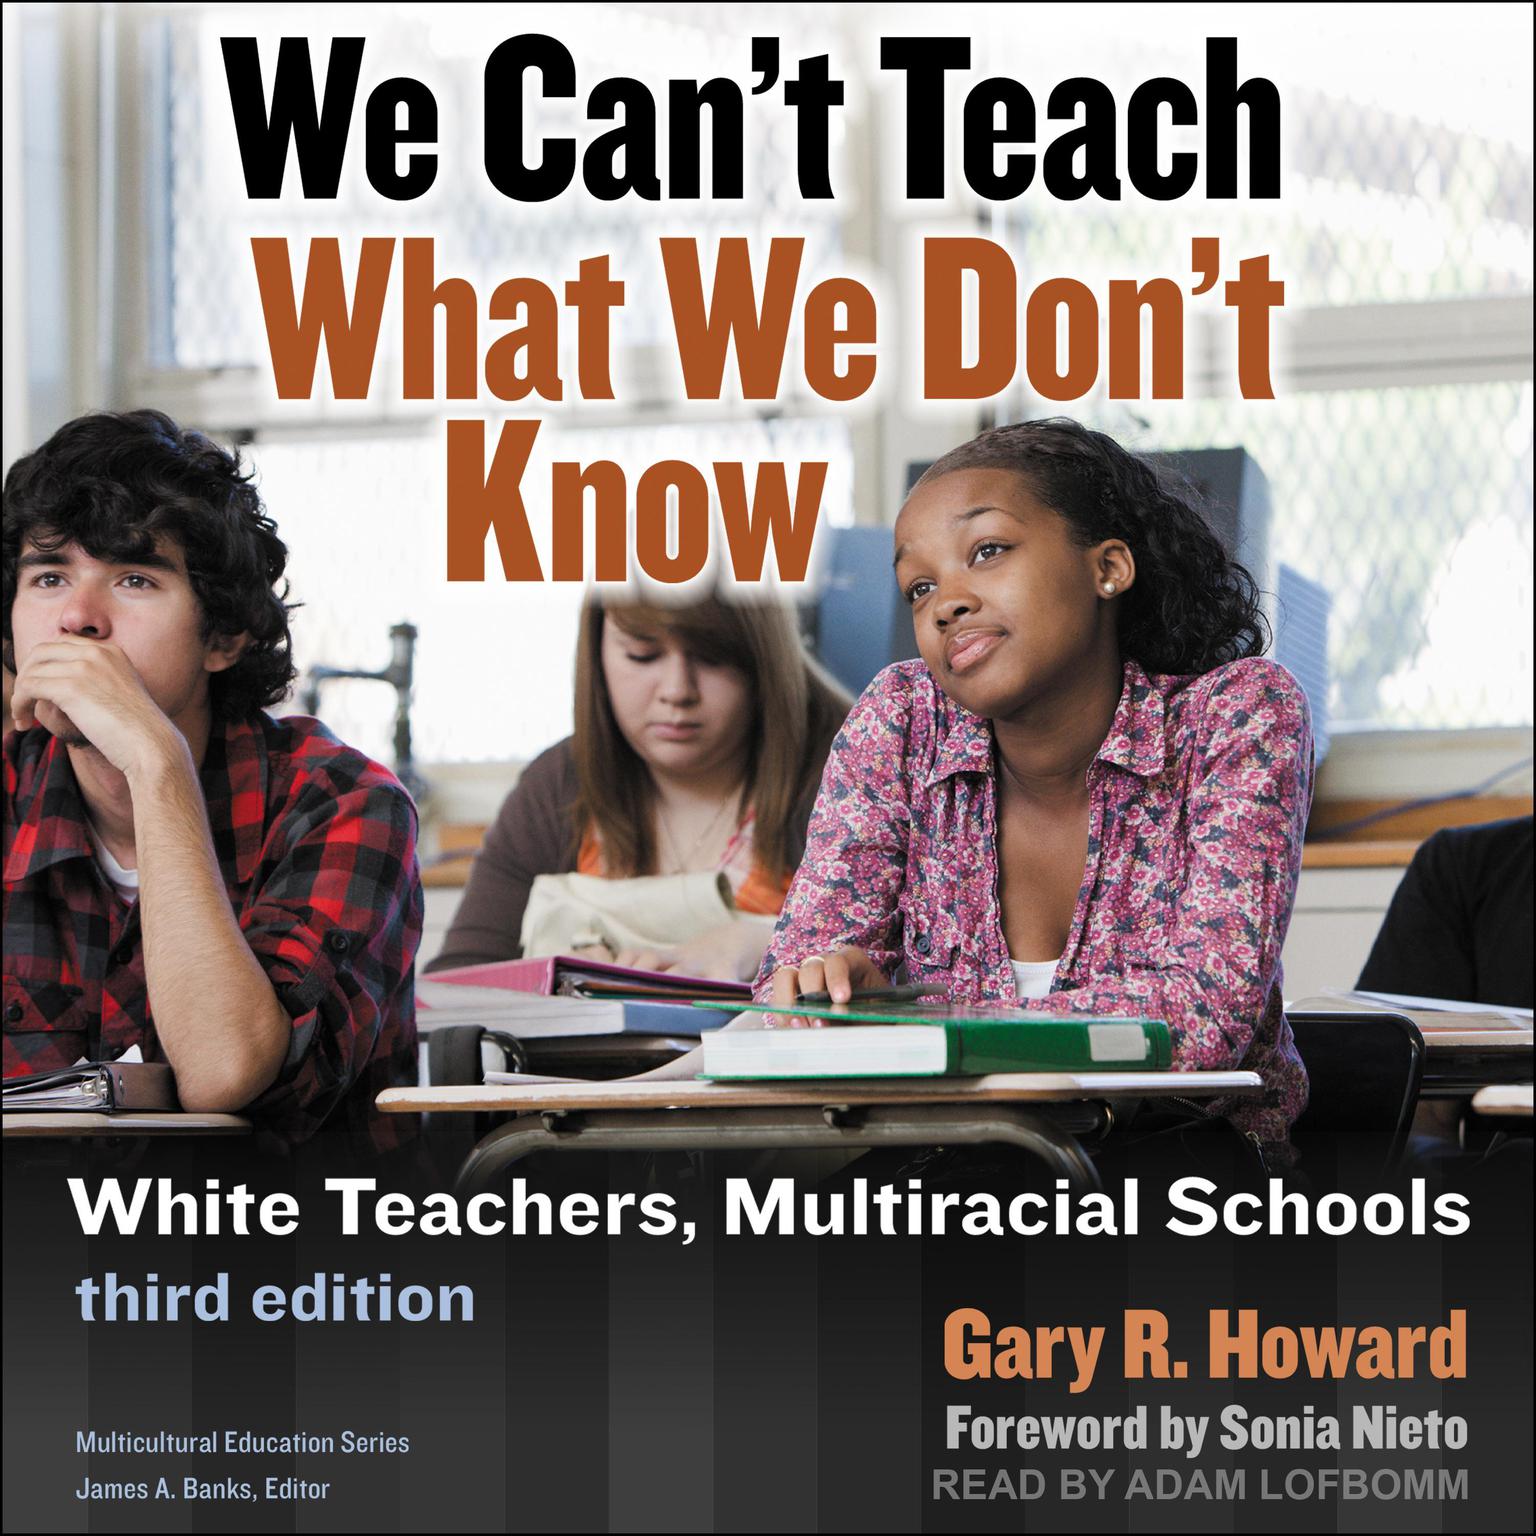 We Cant Teach What We Dont Know: White Teachers, Multiracial Schools: Third Edition Audiobook, by Gary R. Howard